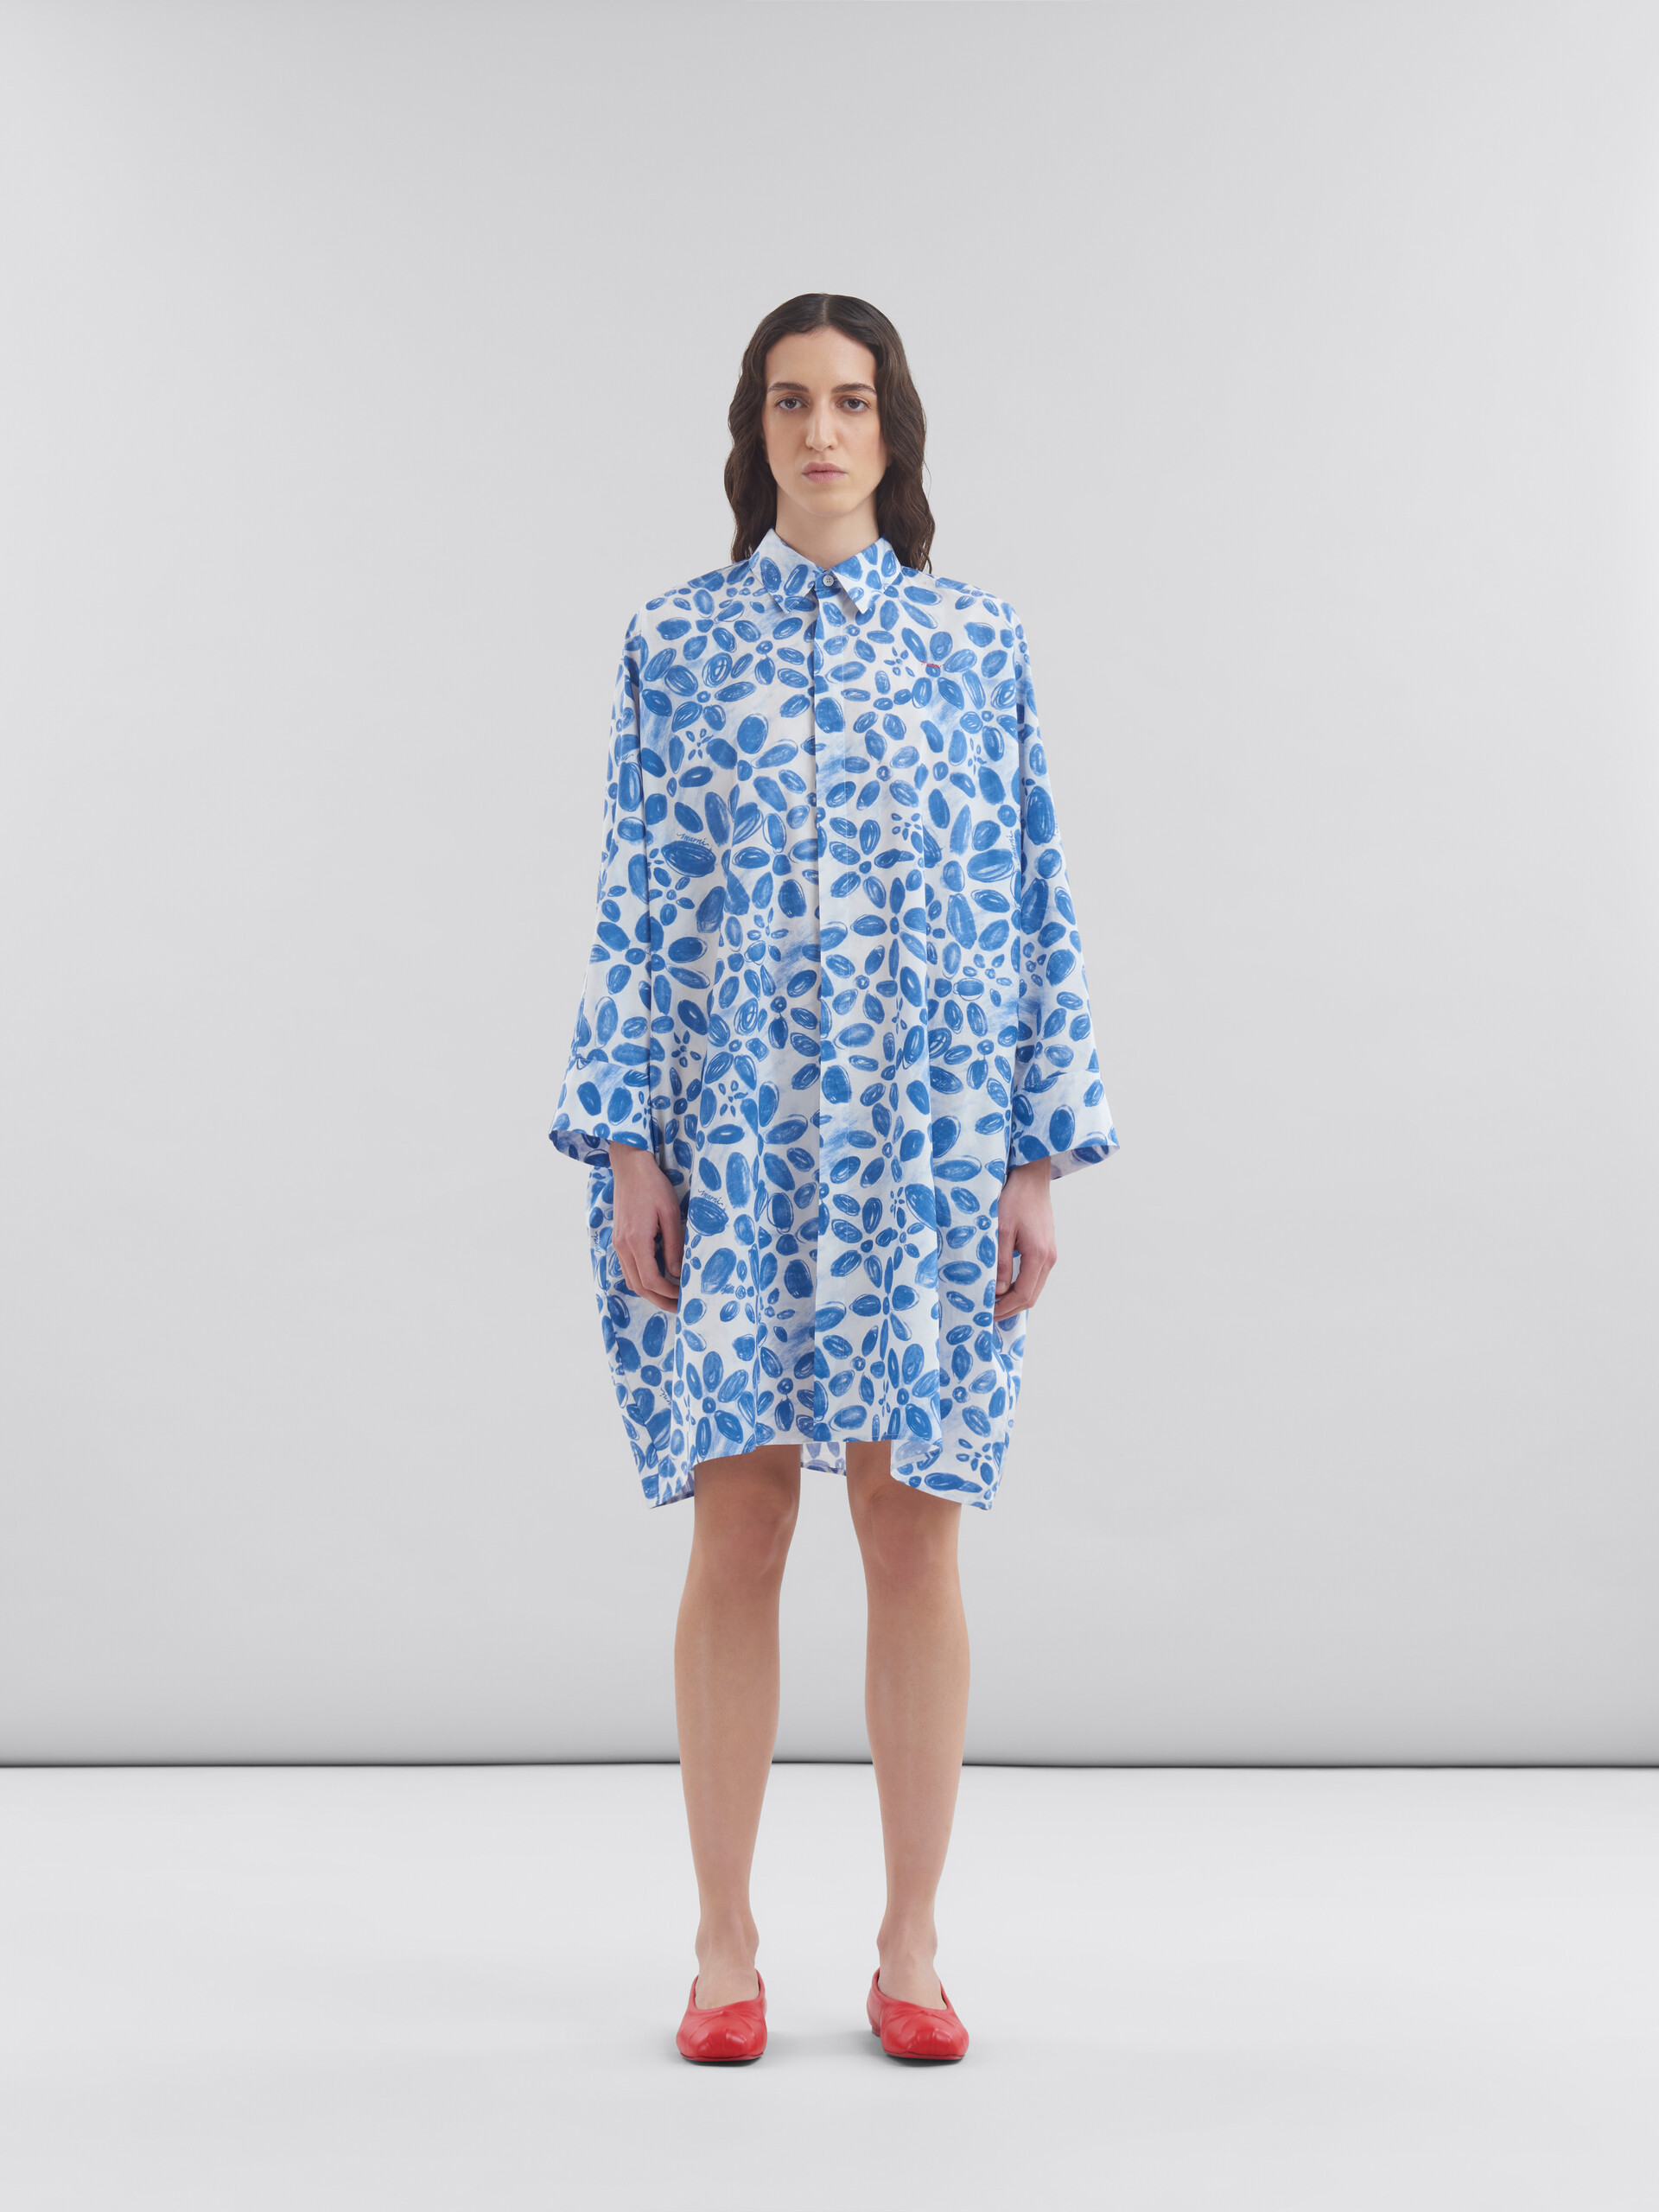 White poplin cocoon dress with Blooming print - Dresses - Image 2